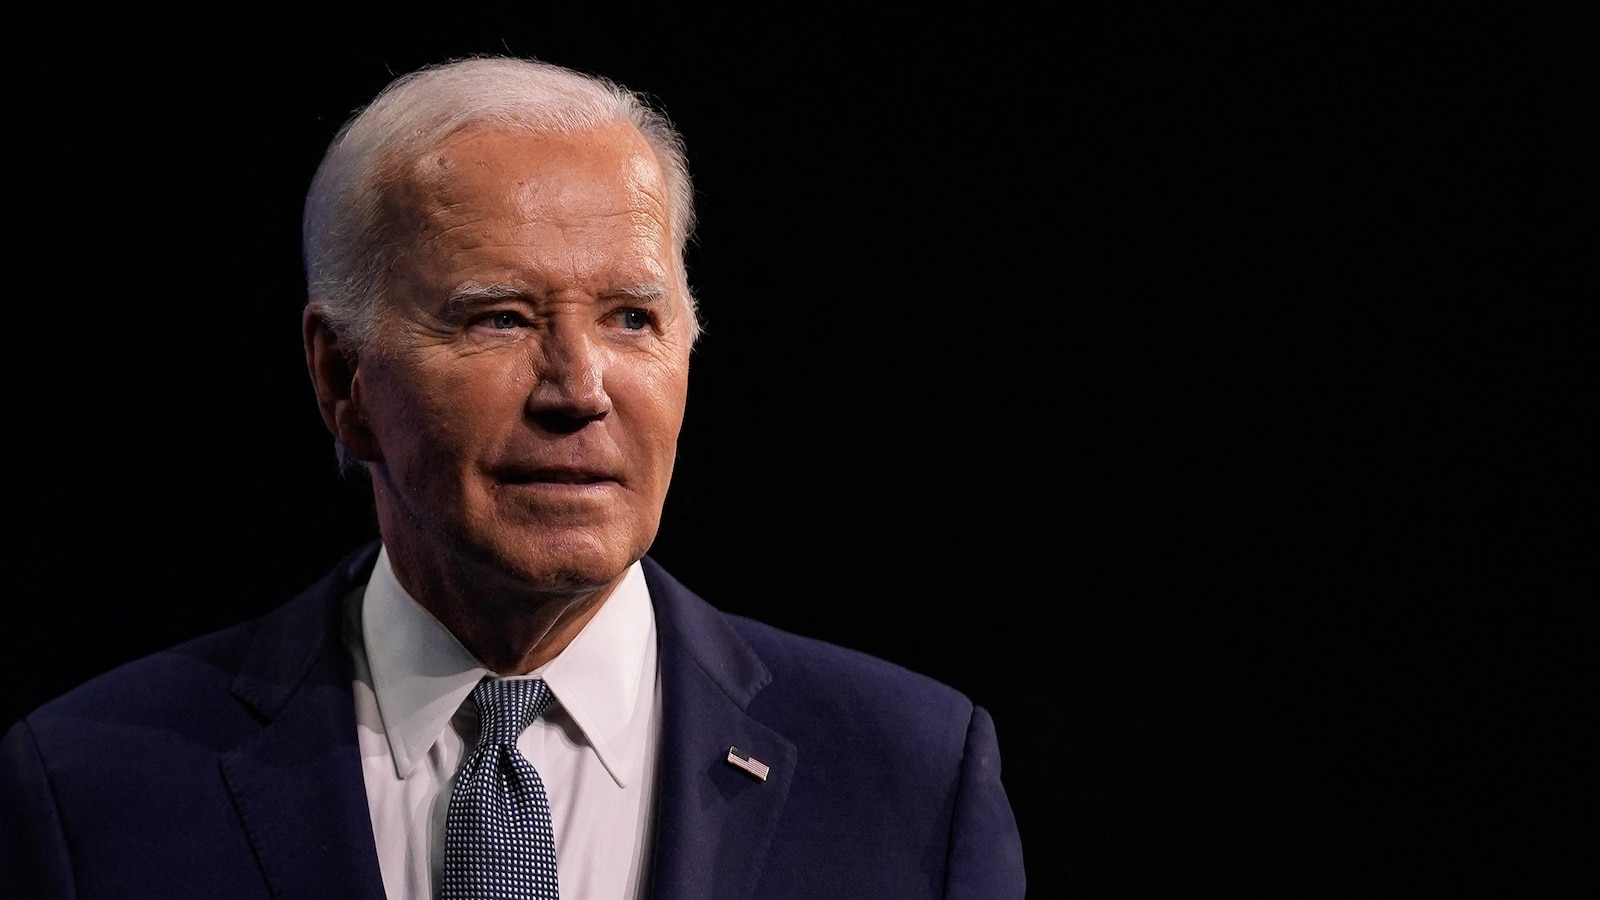 Biden said he might leave race 'if I had some medical condition that emerged'